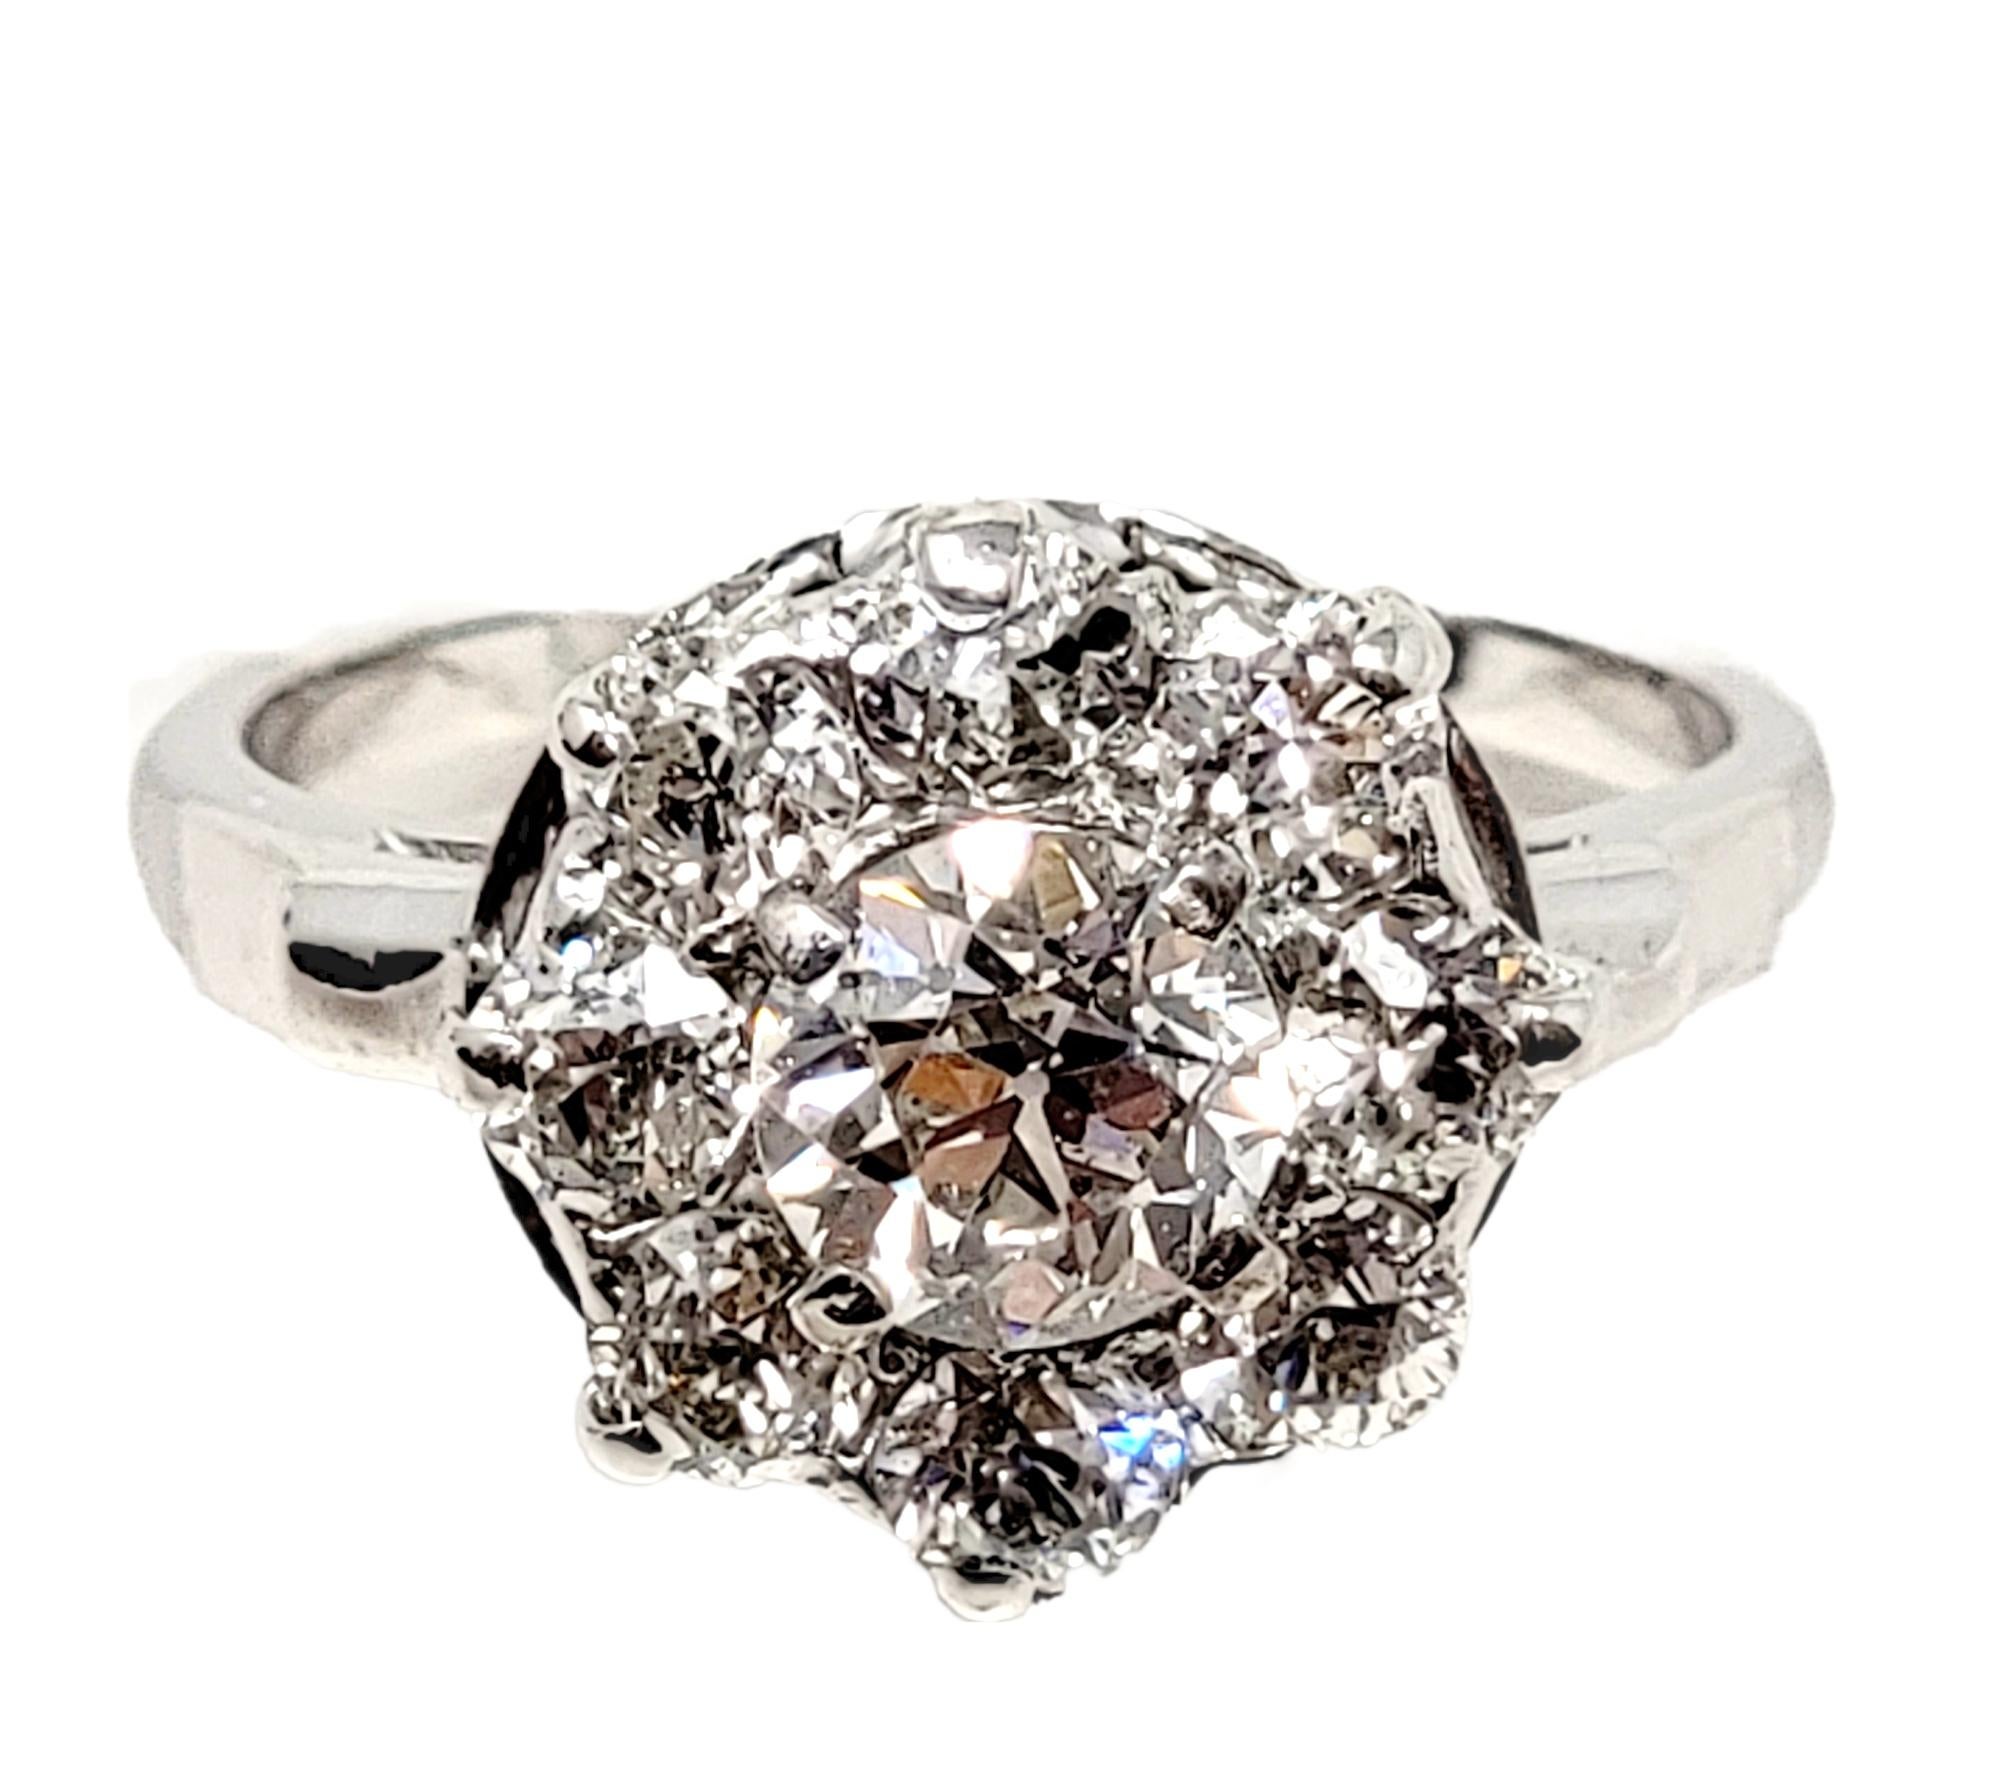 Antique Old European Cut Diamond Halo Engagement Ring 14 Karat Gold  In Good Condition For Sale In Scottsdale, AZ